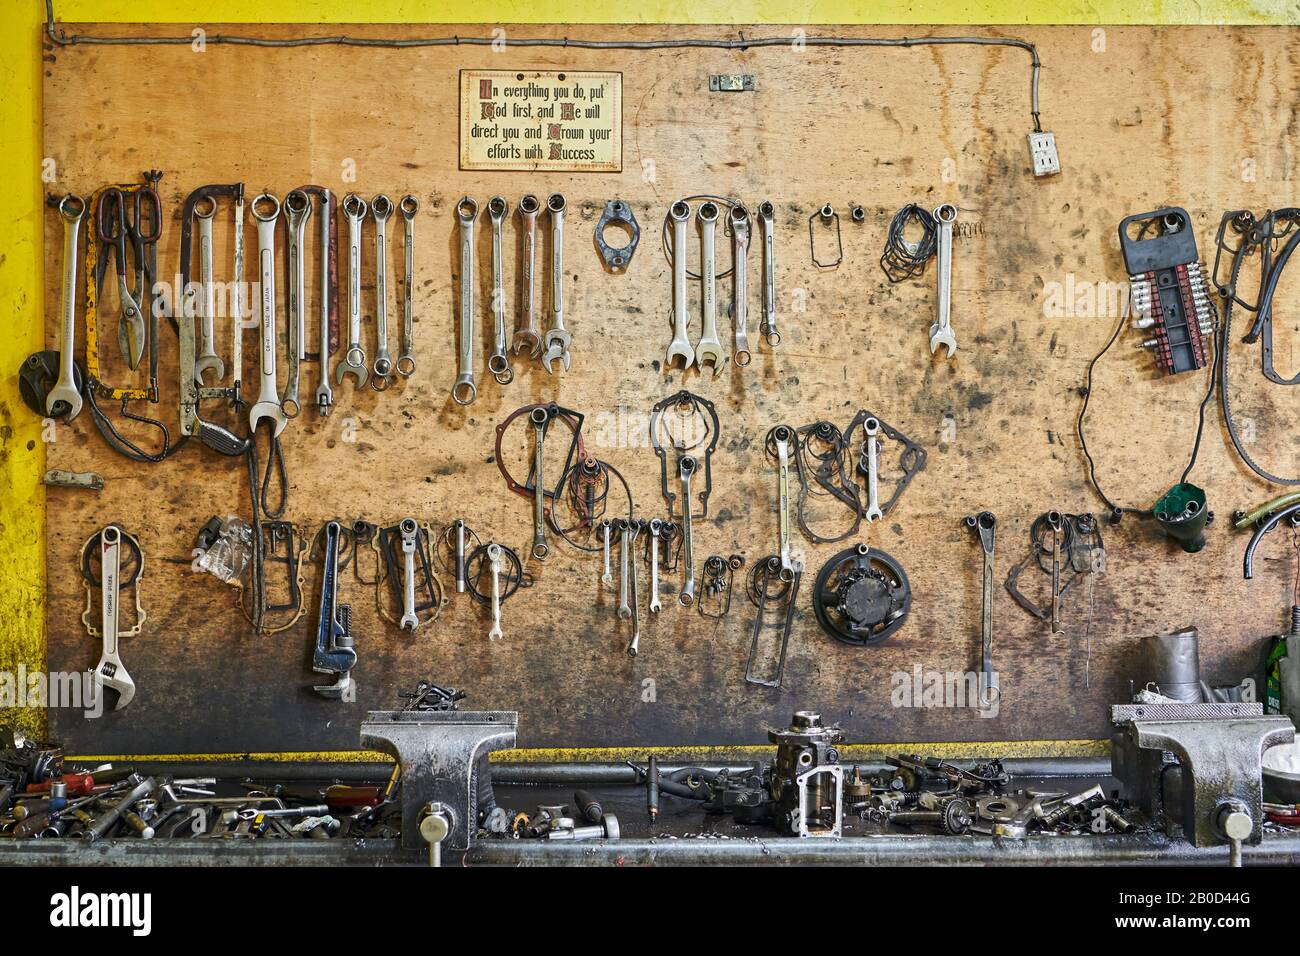 Iloilo City, Philippines: Close-up of a tool board and oily spare parts in a car repair shop, with a religious motivation sign Stock Photo